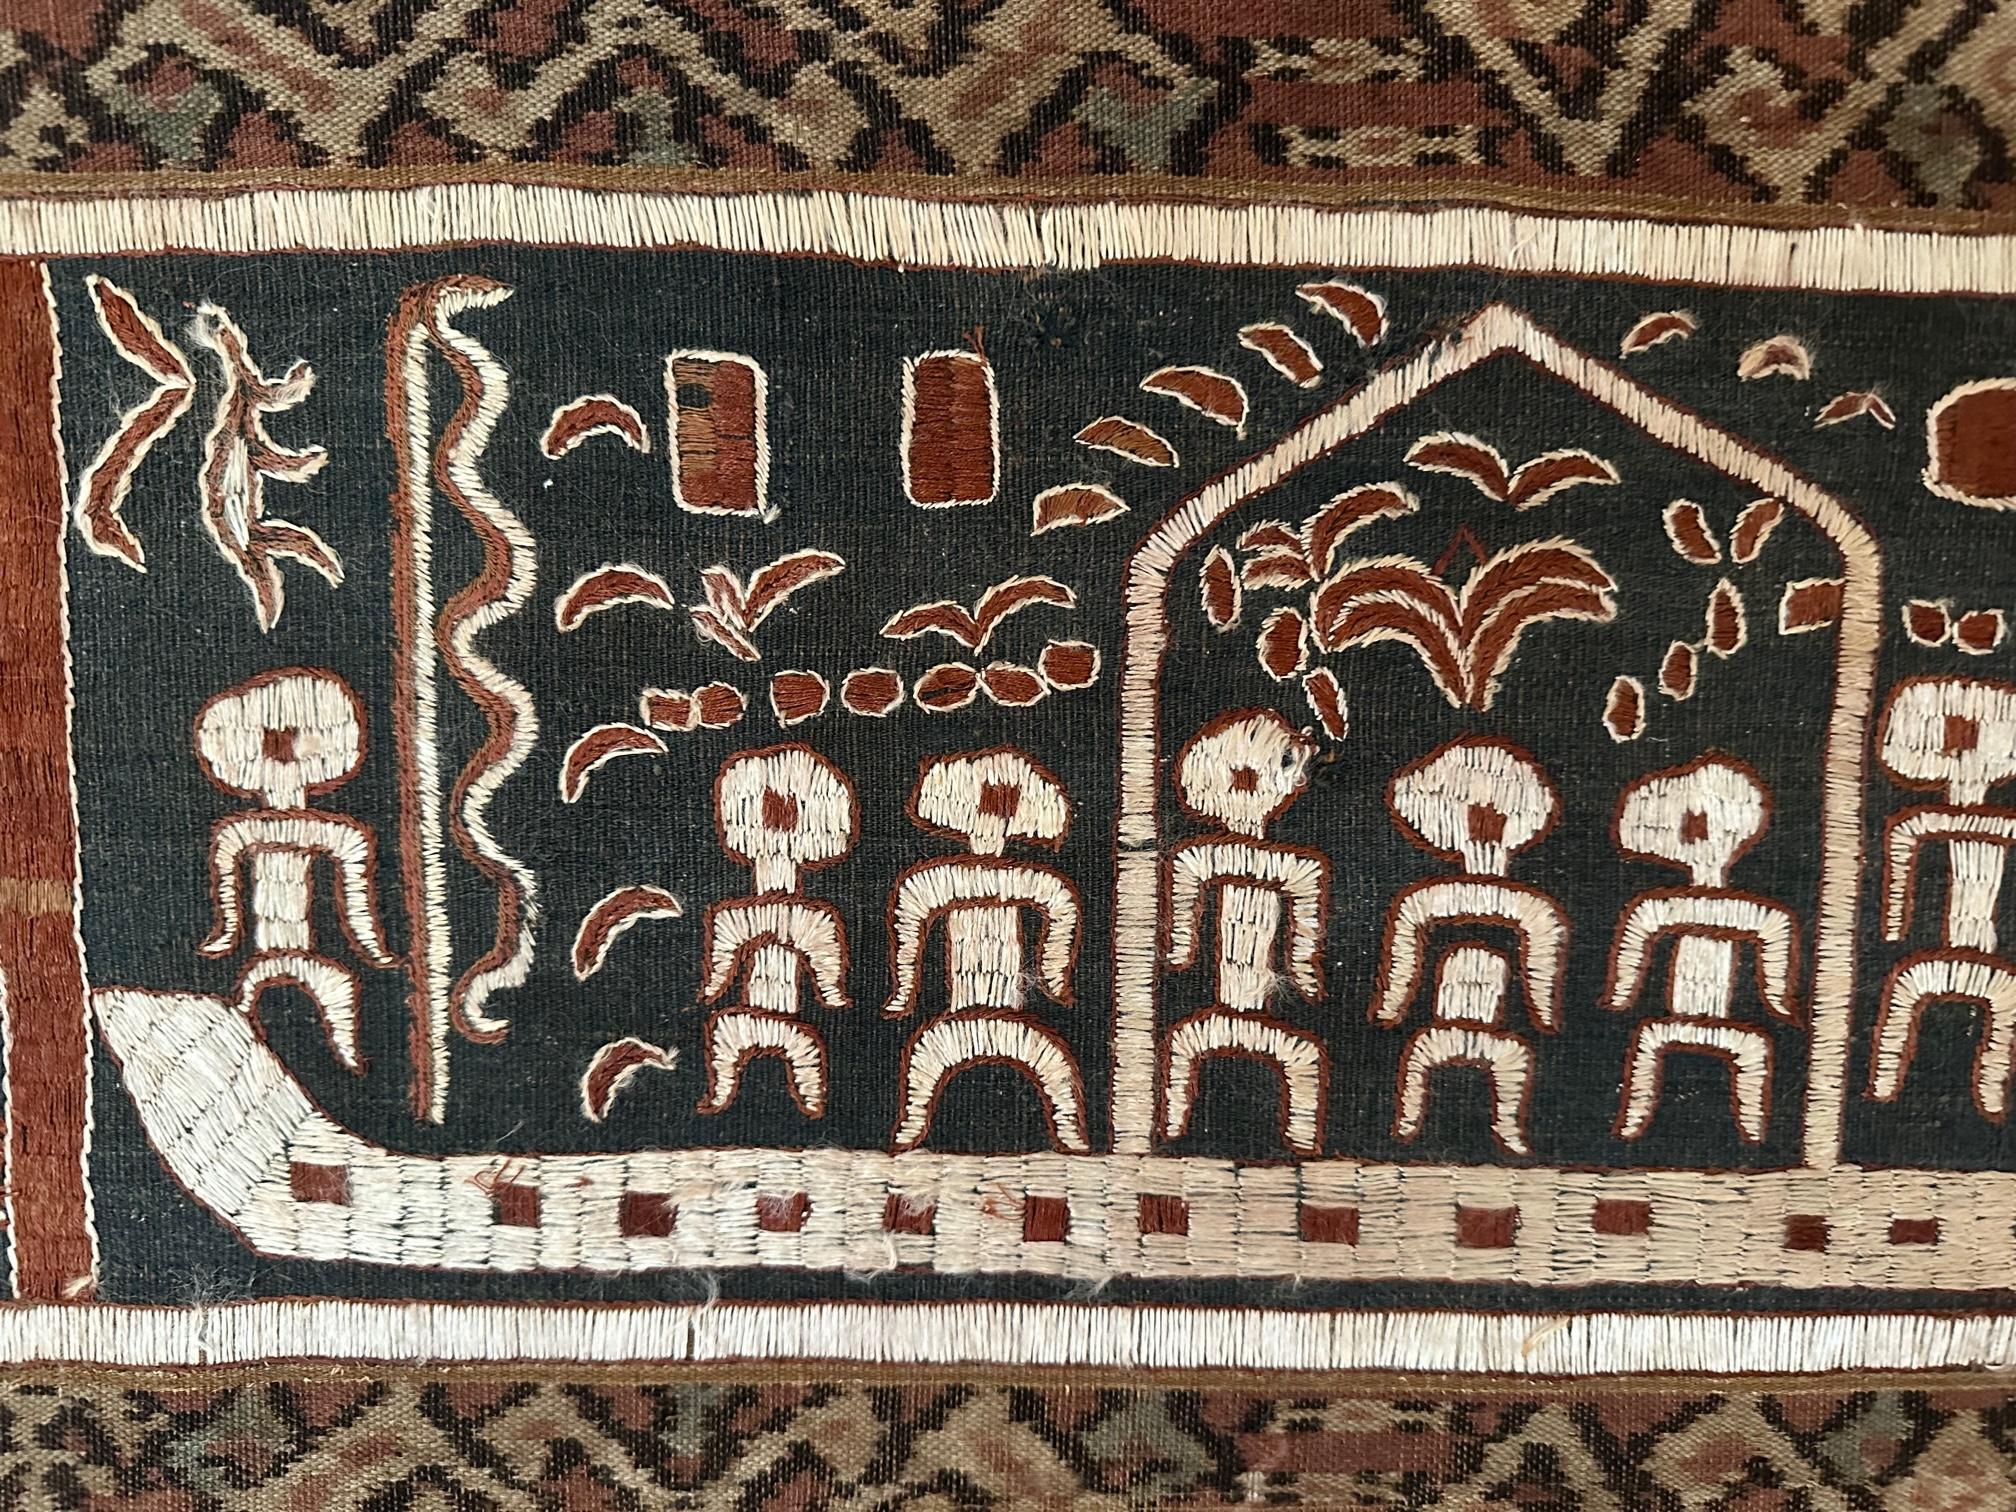 Ikat and Embroidery Textile Panel from Sumatra Indonesia In Good Condition For Sale In Atlanta, GA